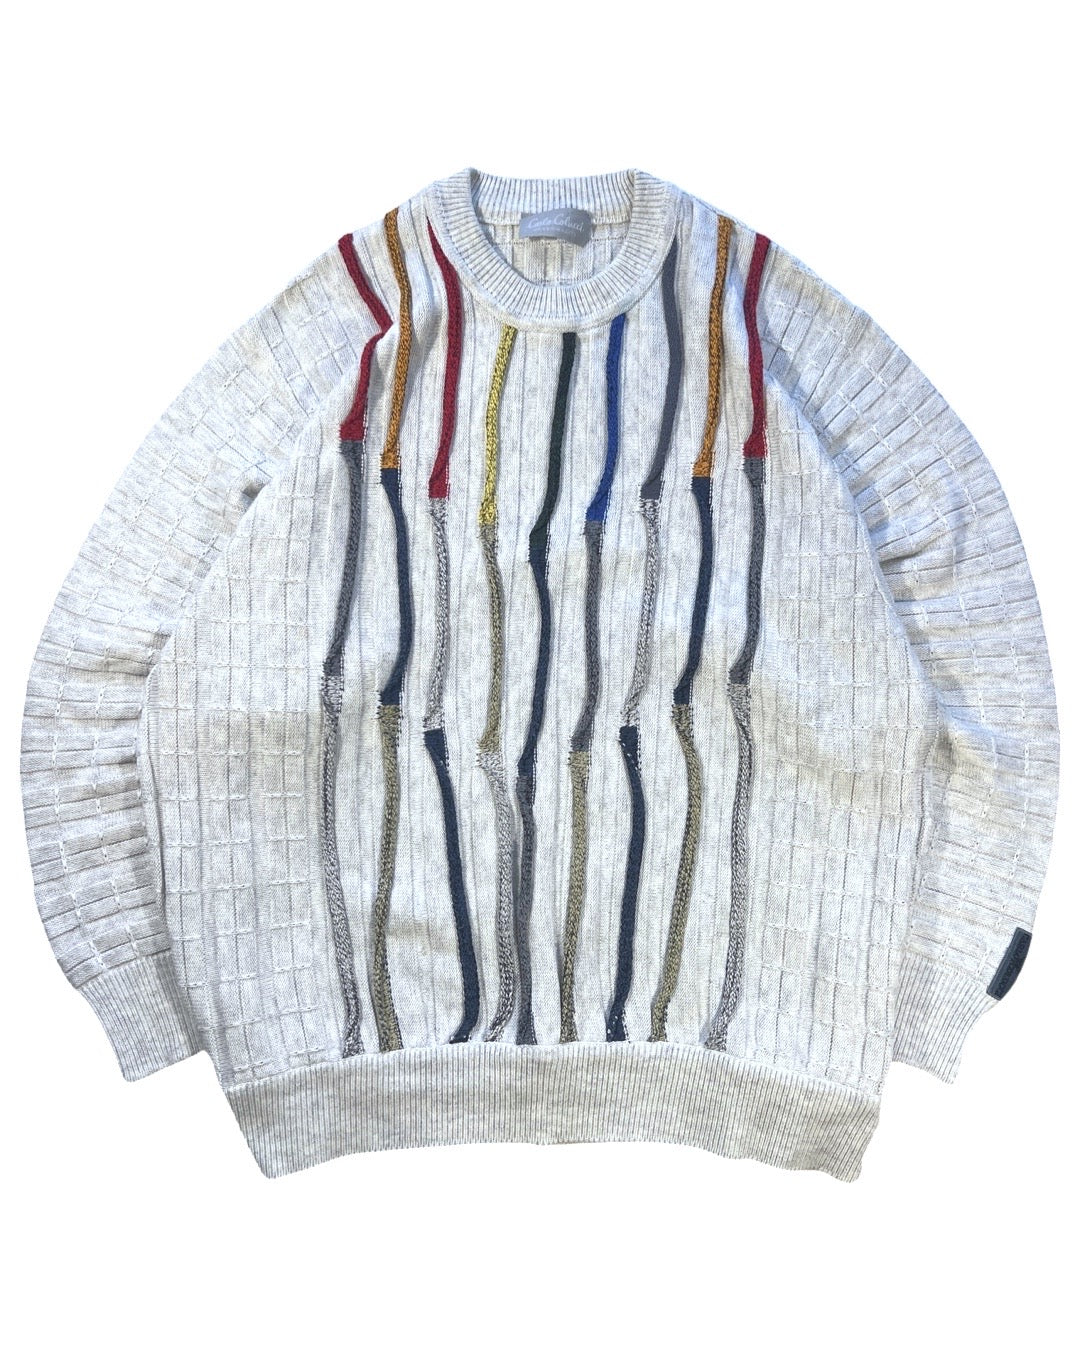 Coogie Style Knit - L